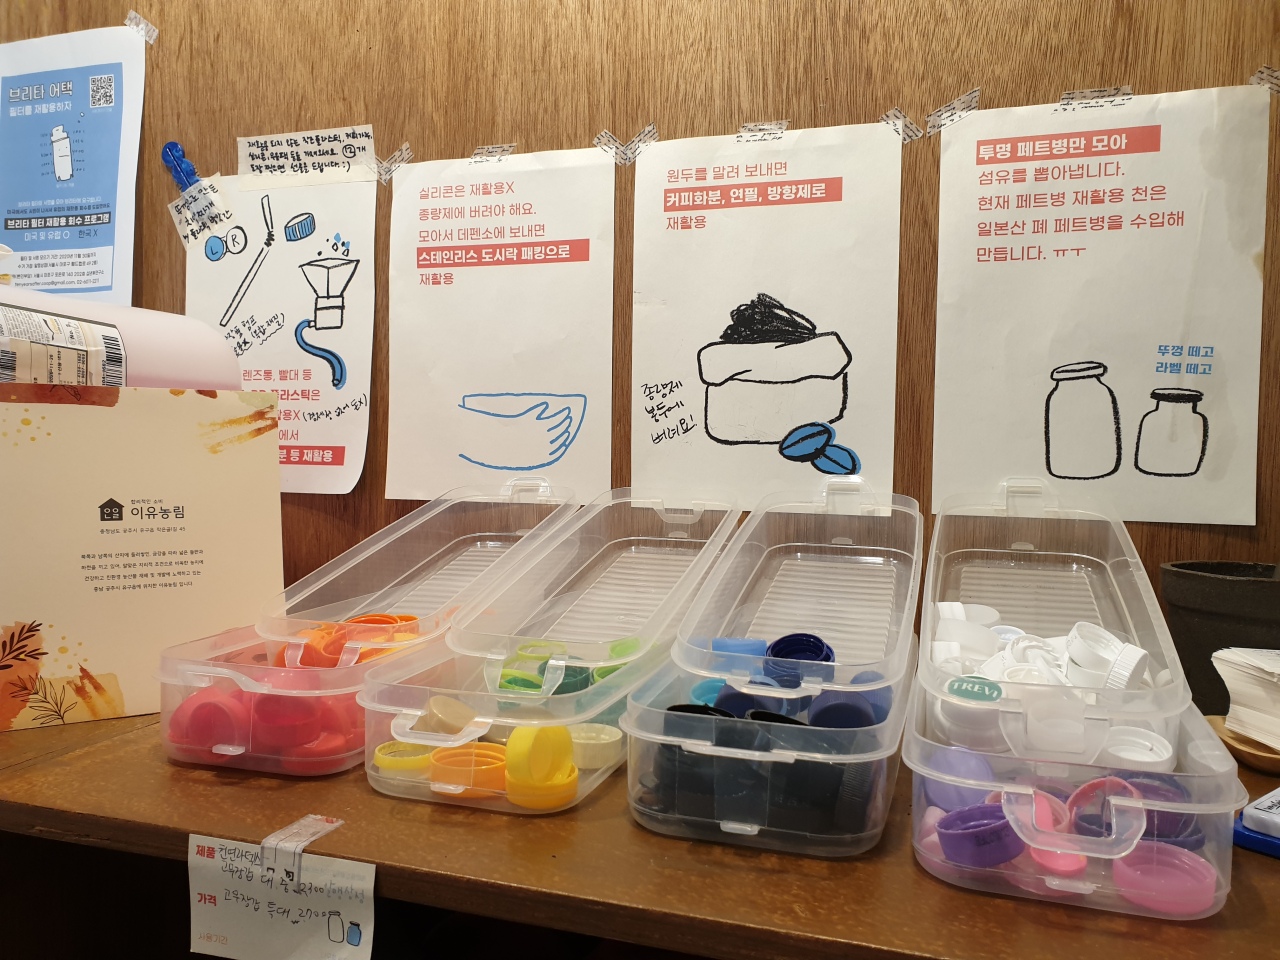 Almang Market collects plastic lids from customers, which will be turned into toothpaste dispensers, according to the store. (Park Yuna/The Korea Herald)